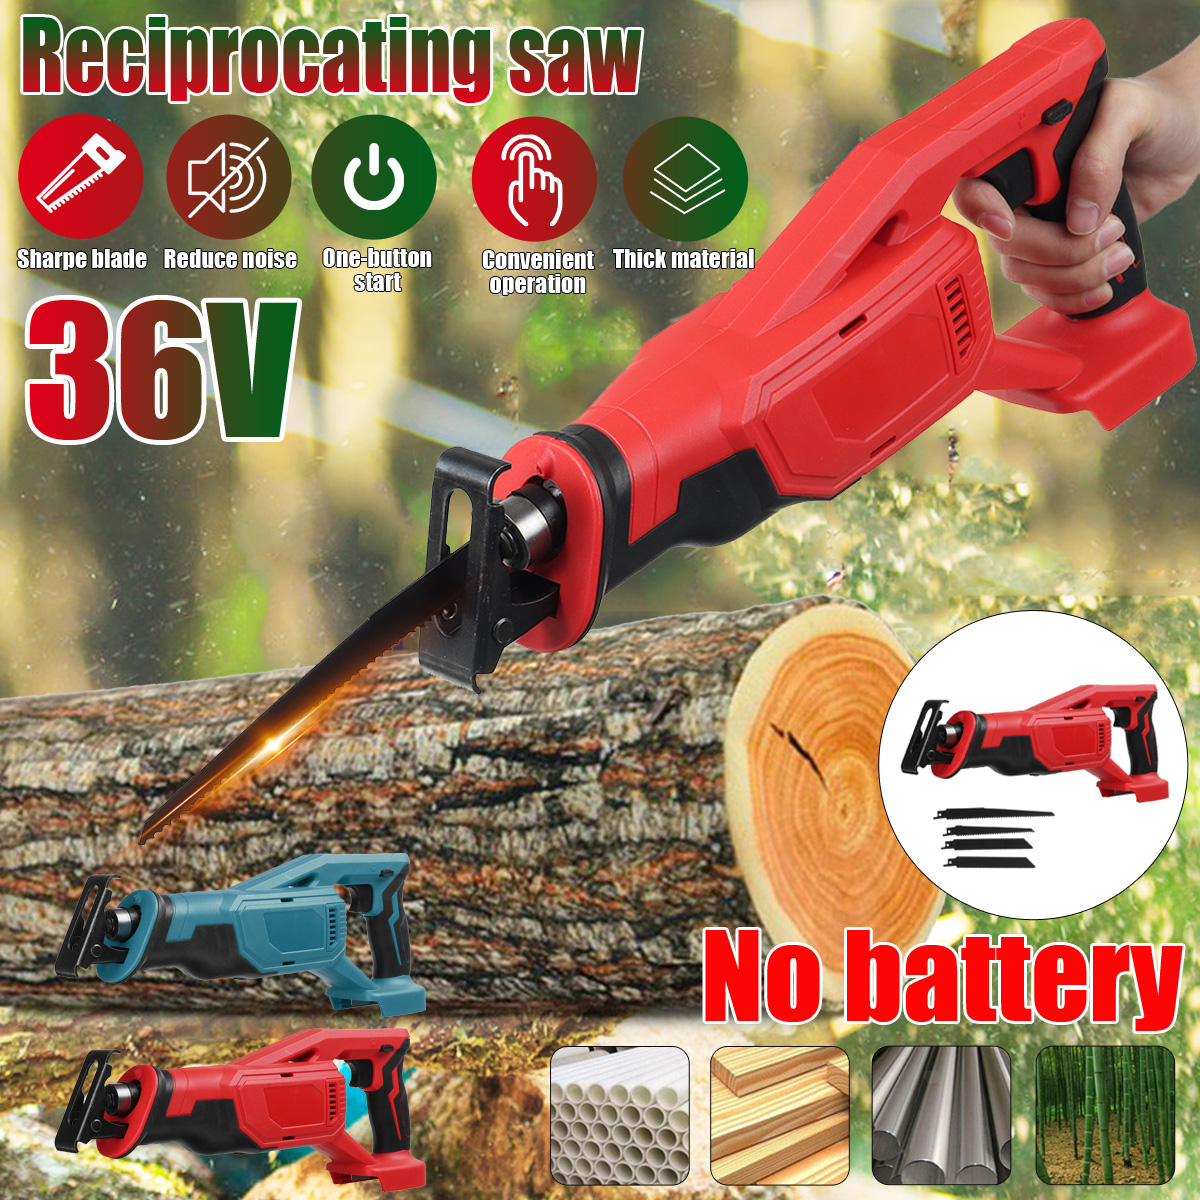 Cordless-Electric-Reciprocating-Saw-PVC-Pipes-Wood-Metal-Cutter-Without-Battery-1816495-2